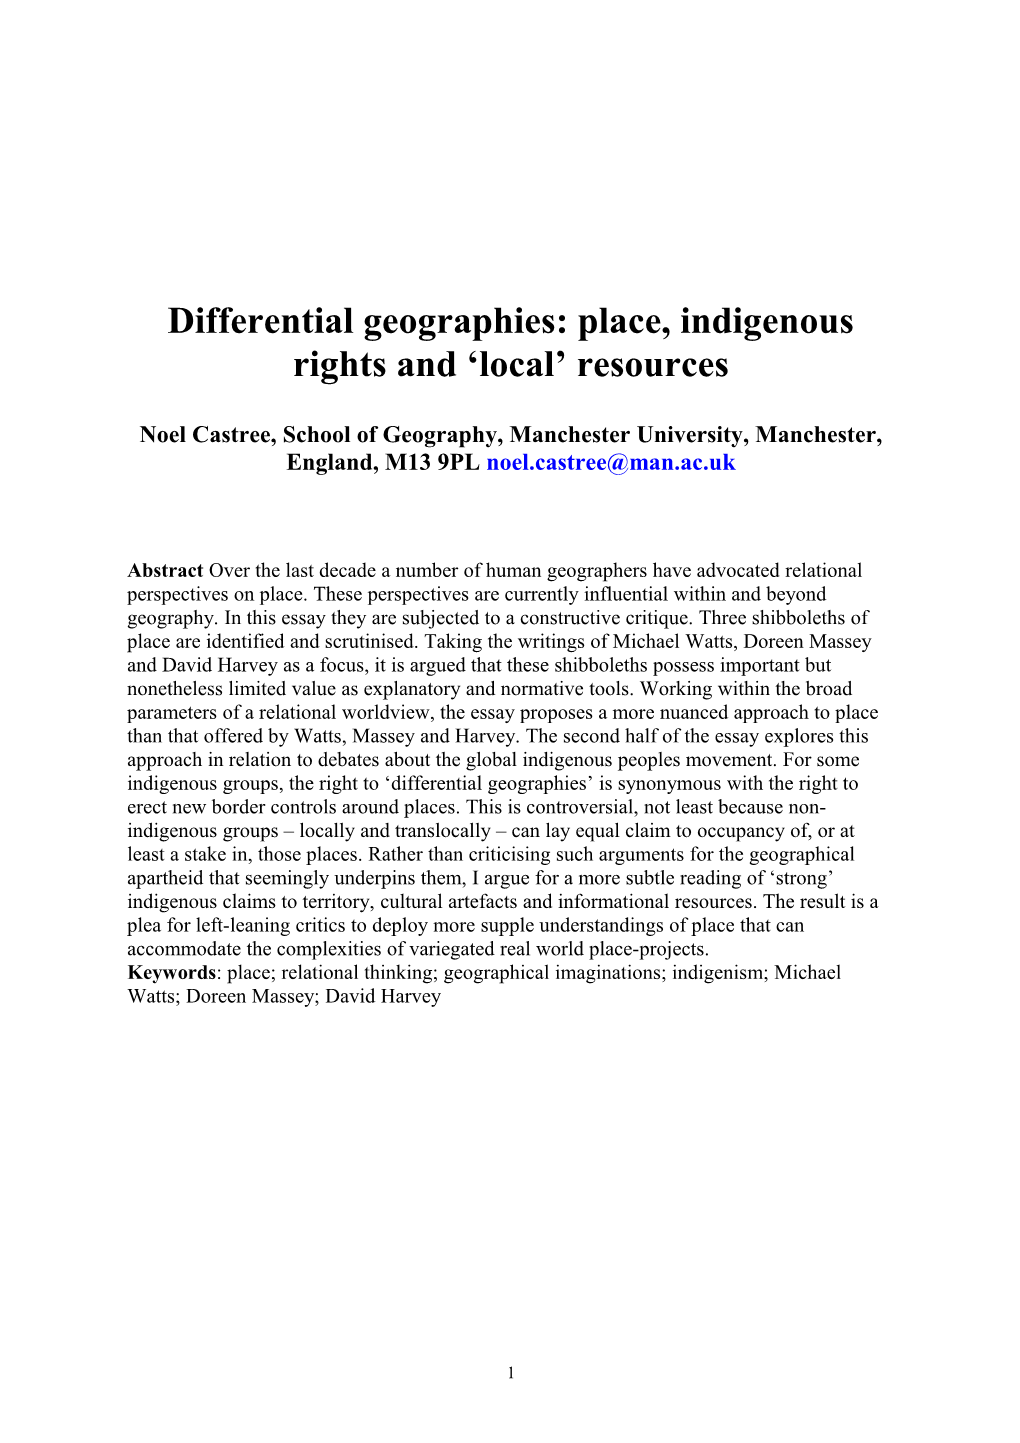 Differential Geographies: Place, Indigenous Rights and Glocal Resources